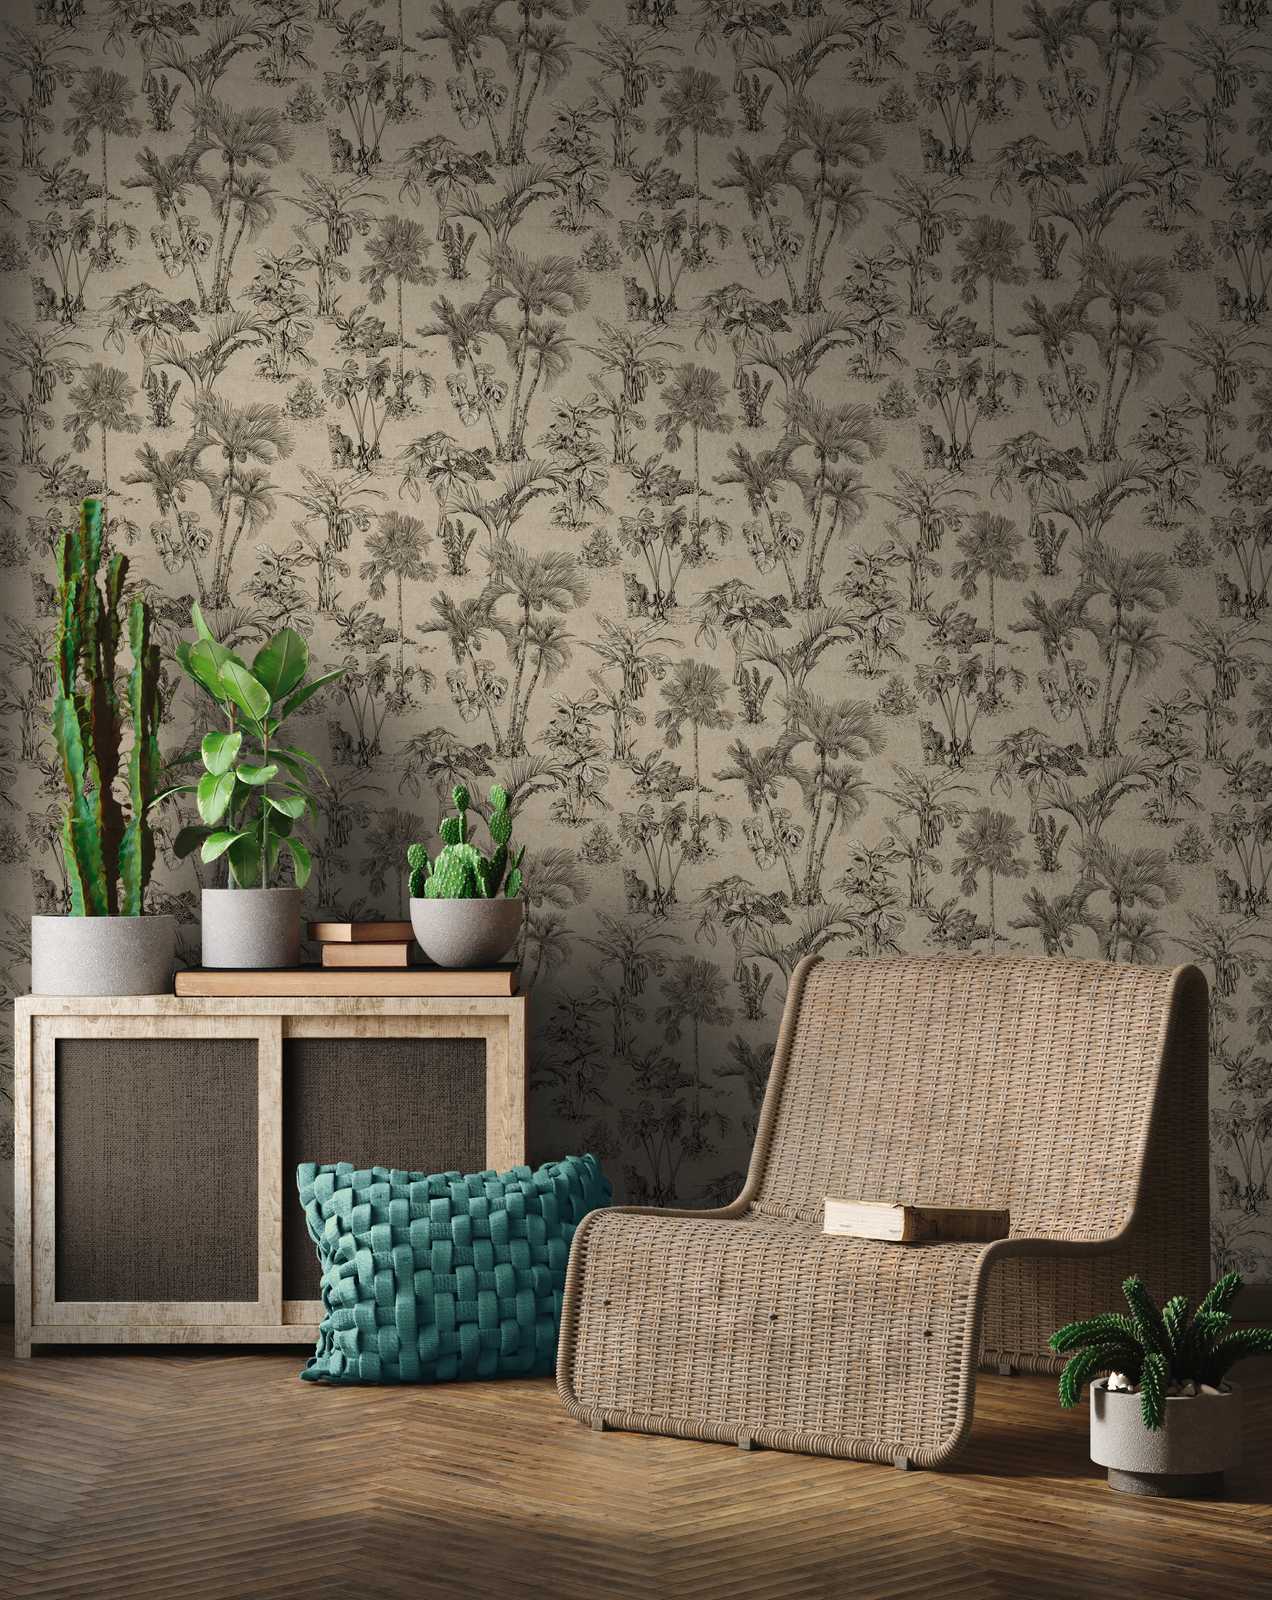             Wallpaper jungle pattern palm trees in colonial style - brown, black
        